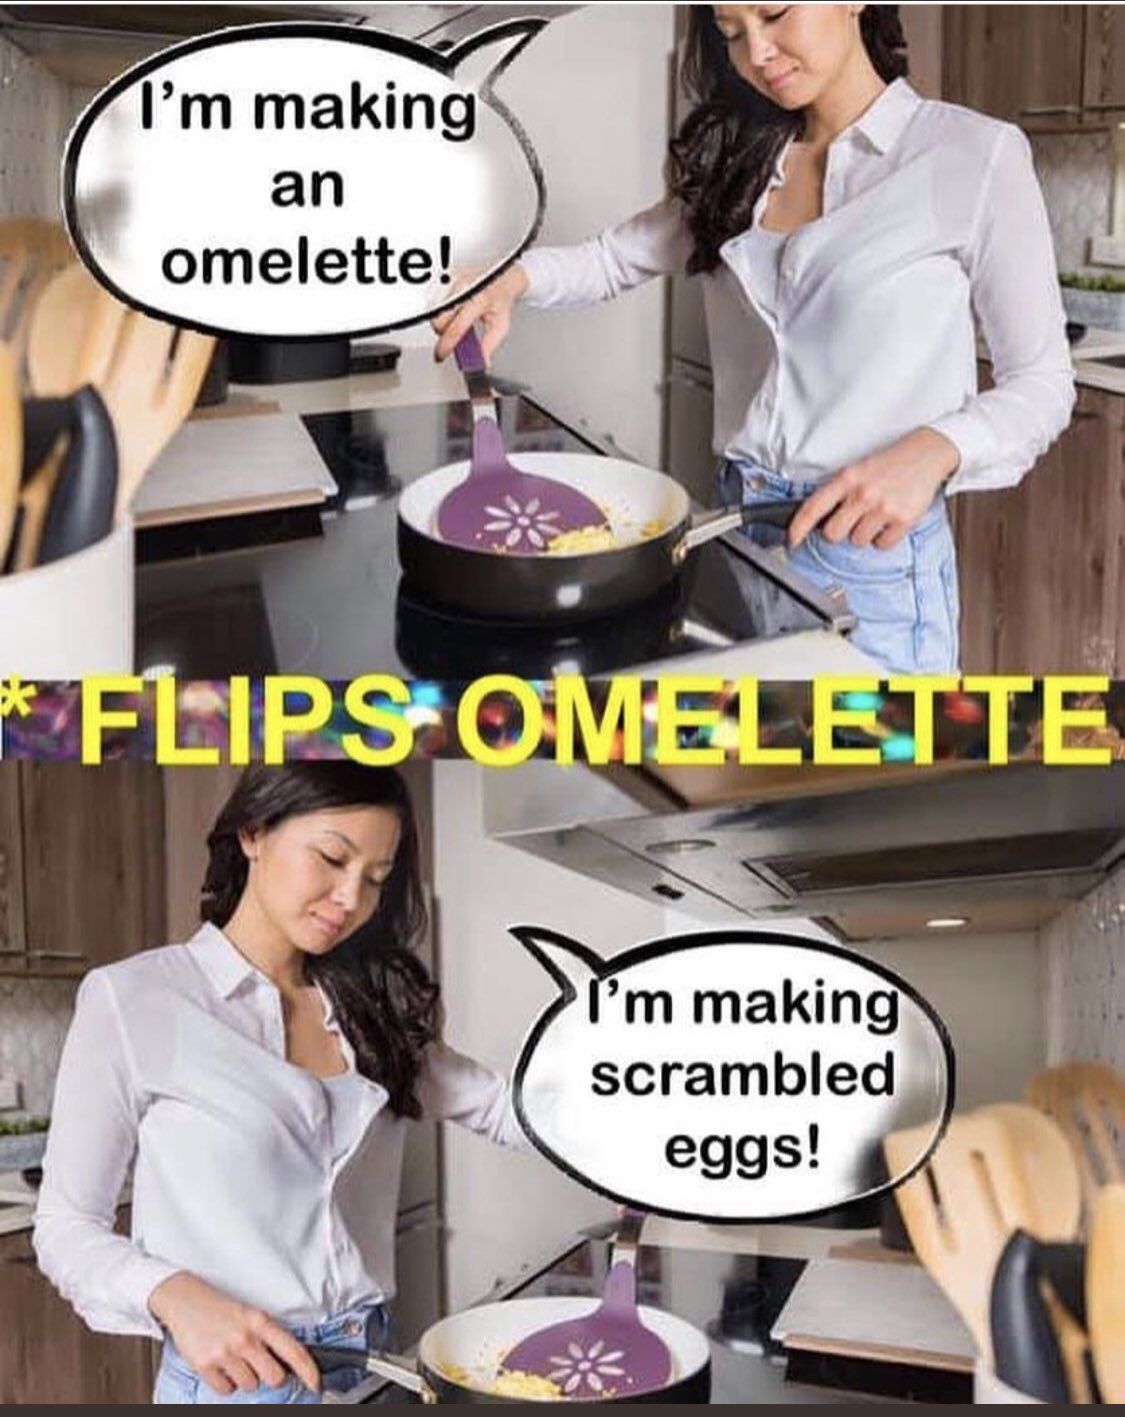 I swear every time I try making an omelette